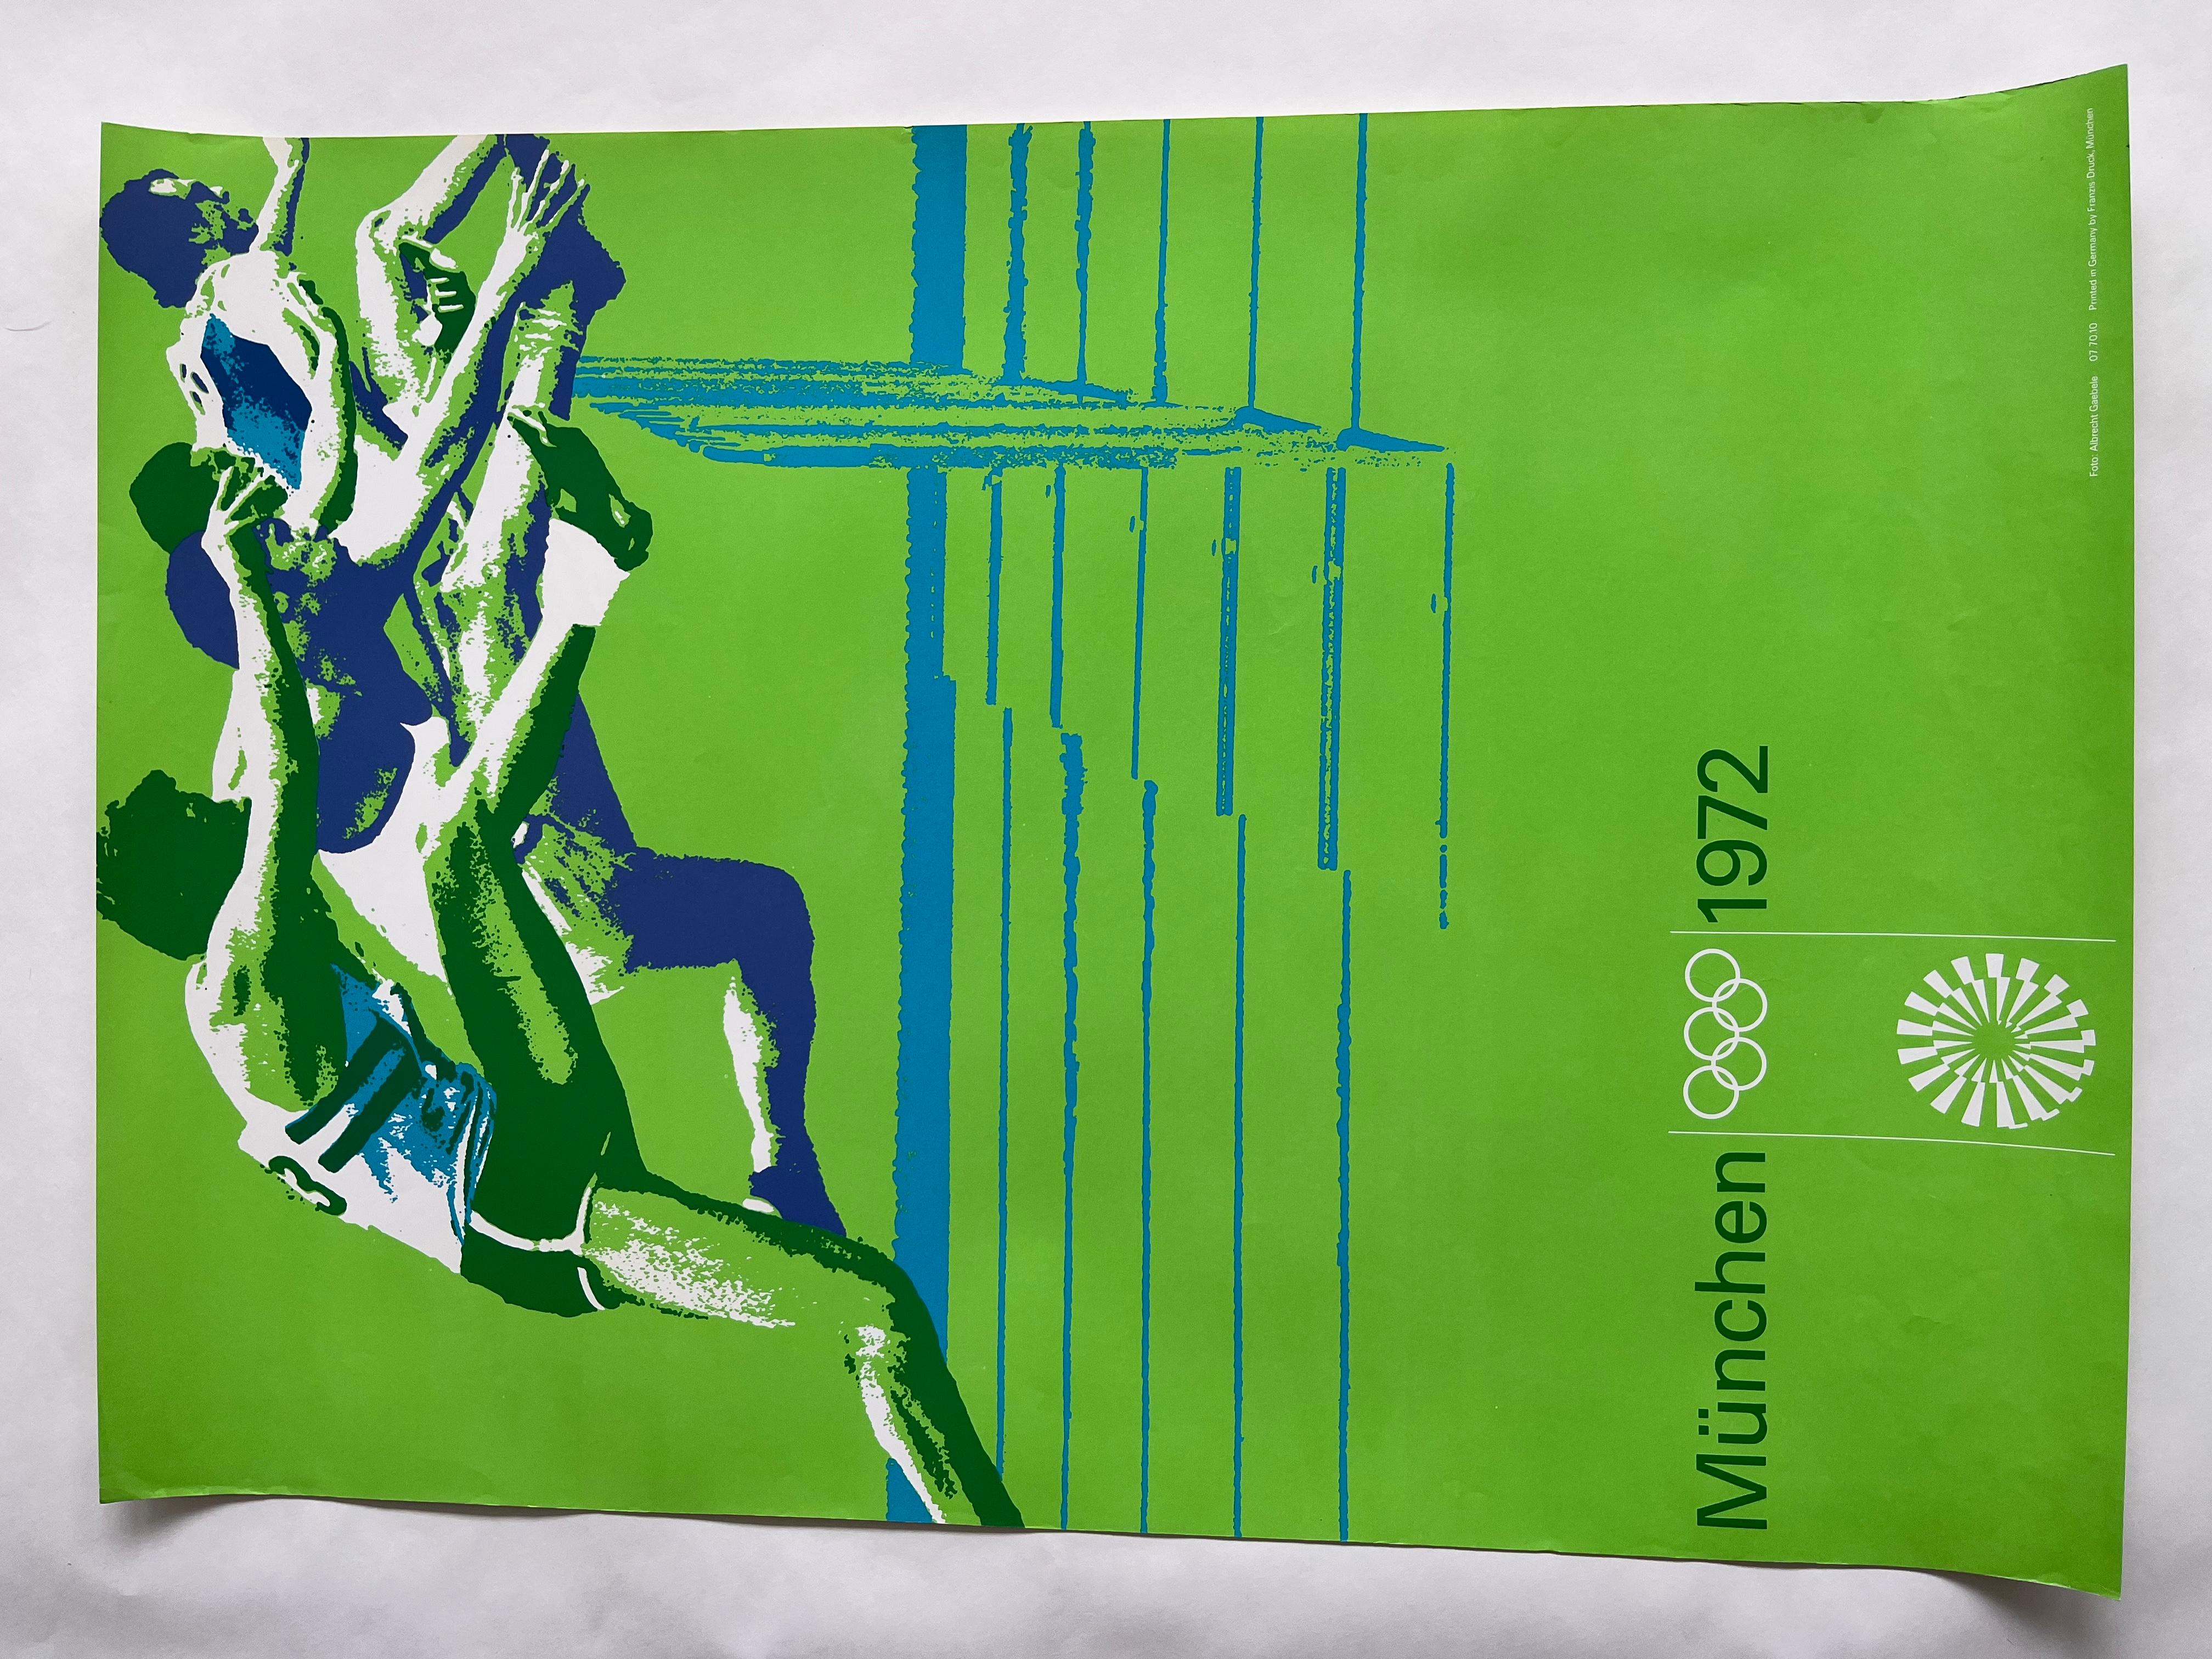 German Otl Aicher Olympic Games Munich 1972, Running over Obstacles, Original Poster For Sale